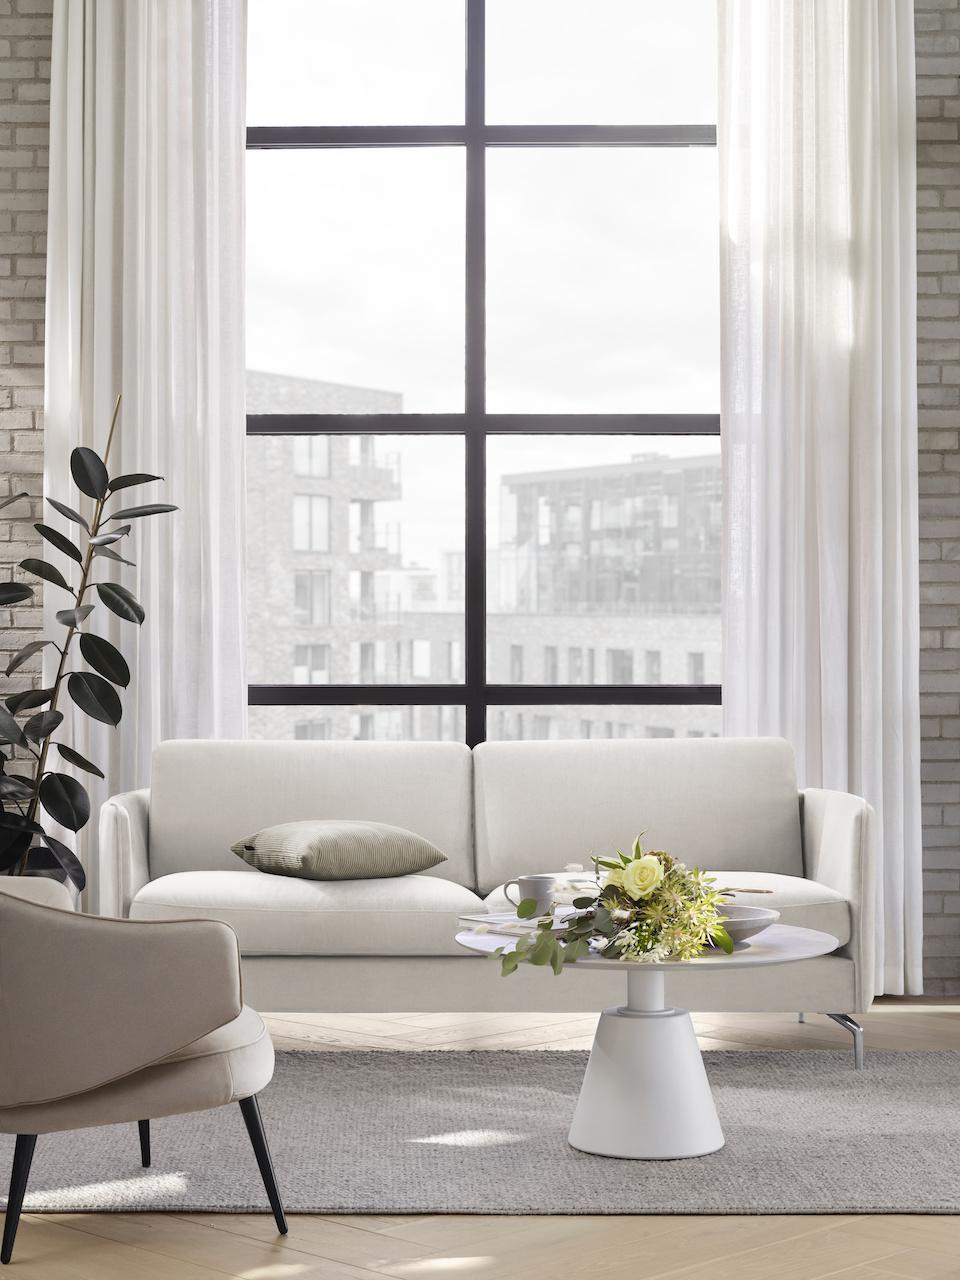 BoConcept Celebrates 70th Anniversary with Special Sales Promotion